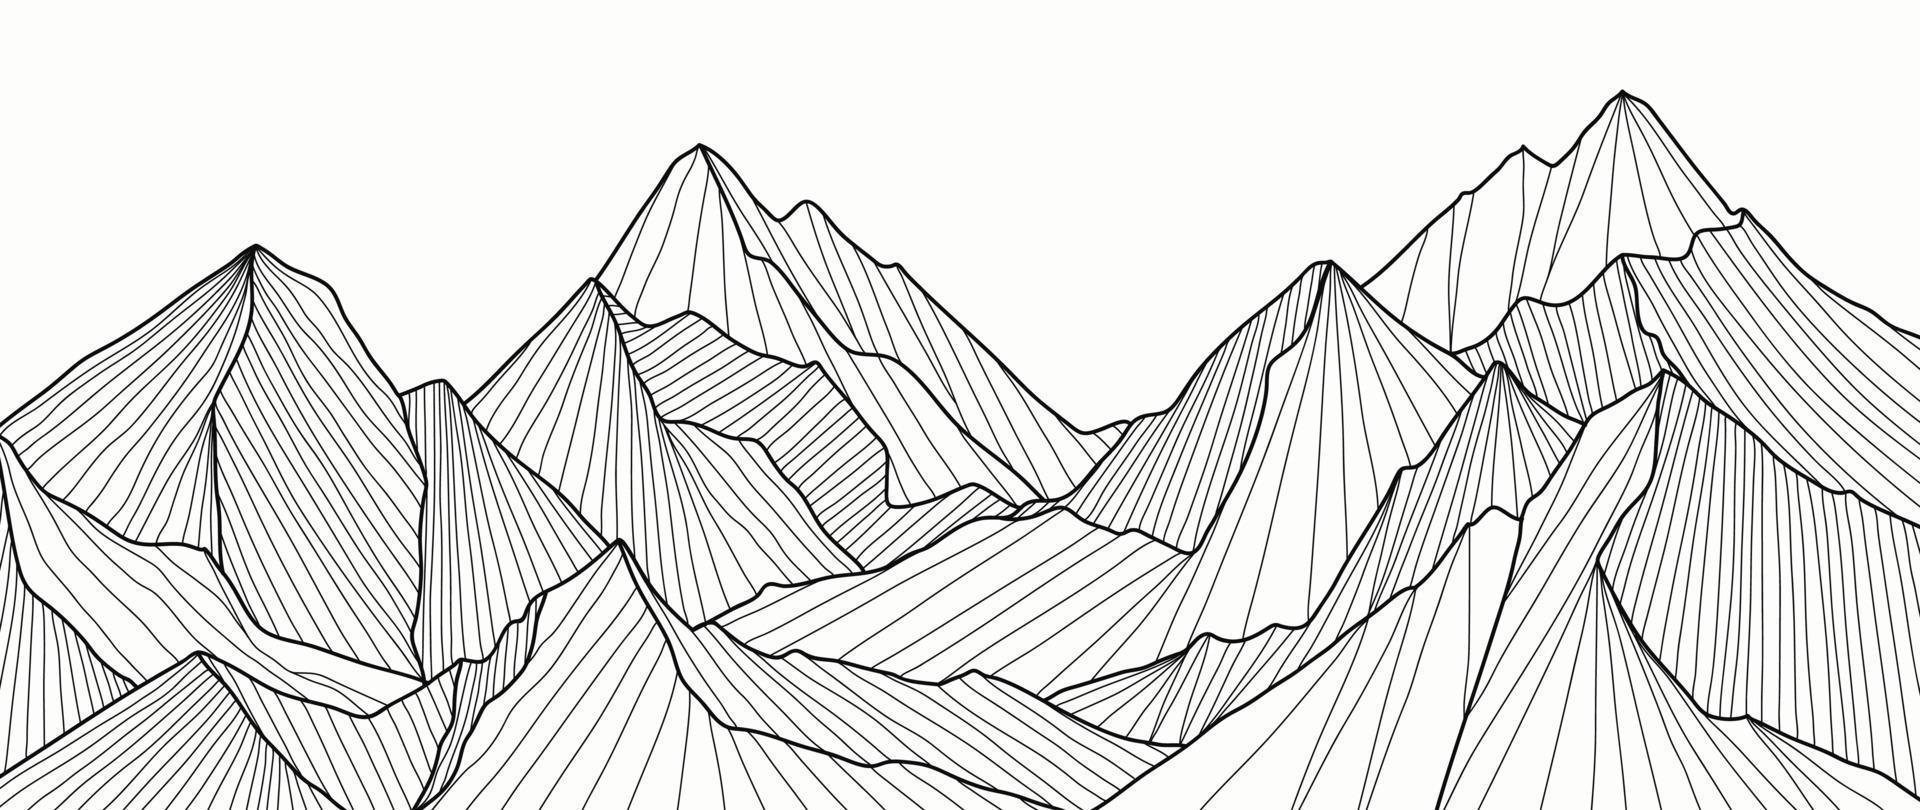 Black and white mountain line art wallpaper. Contour drawing luxury scenic landscape background design illustration for cover, invitation background, packaging design, fabric, banner and print. vector